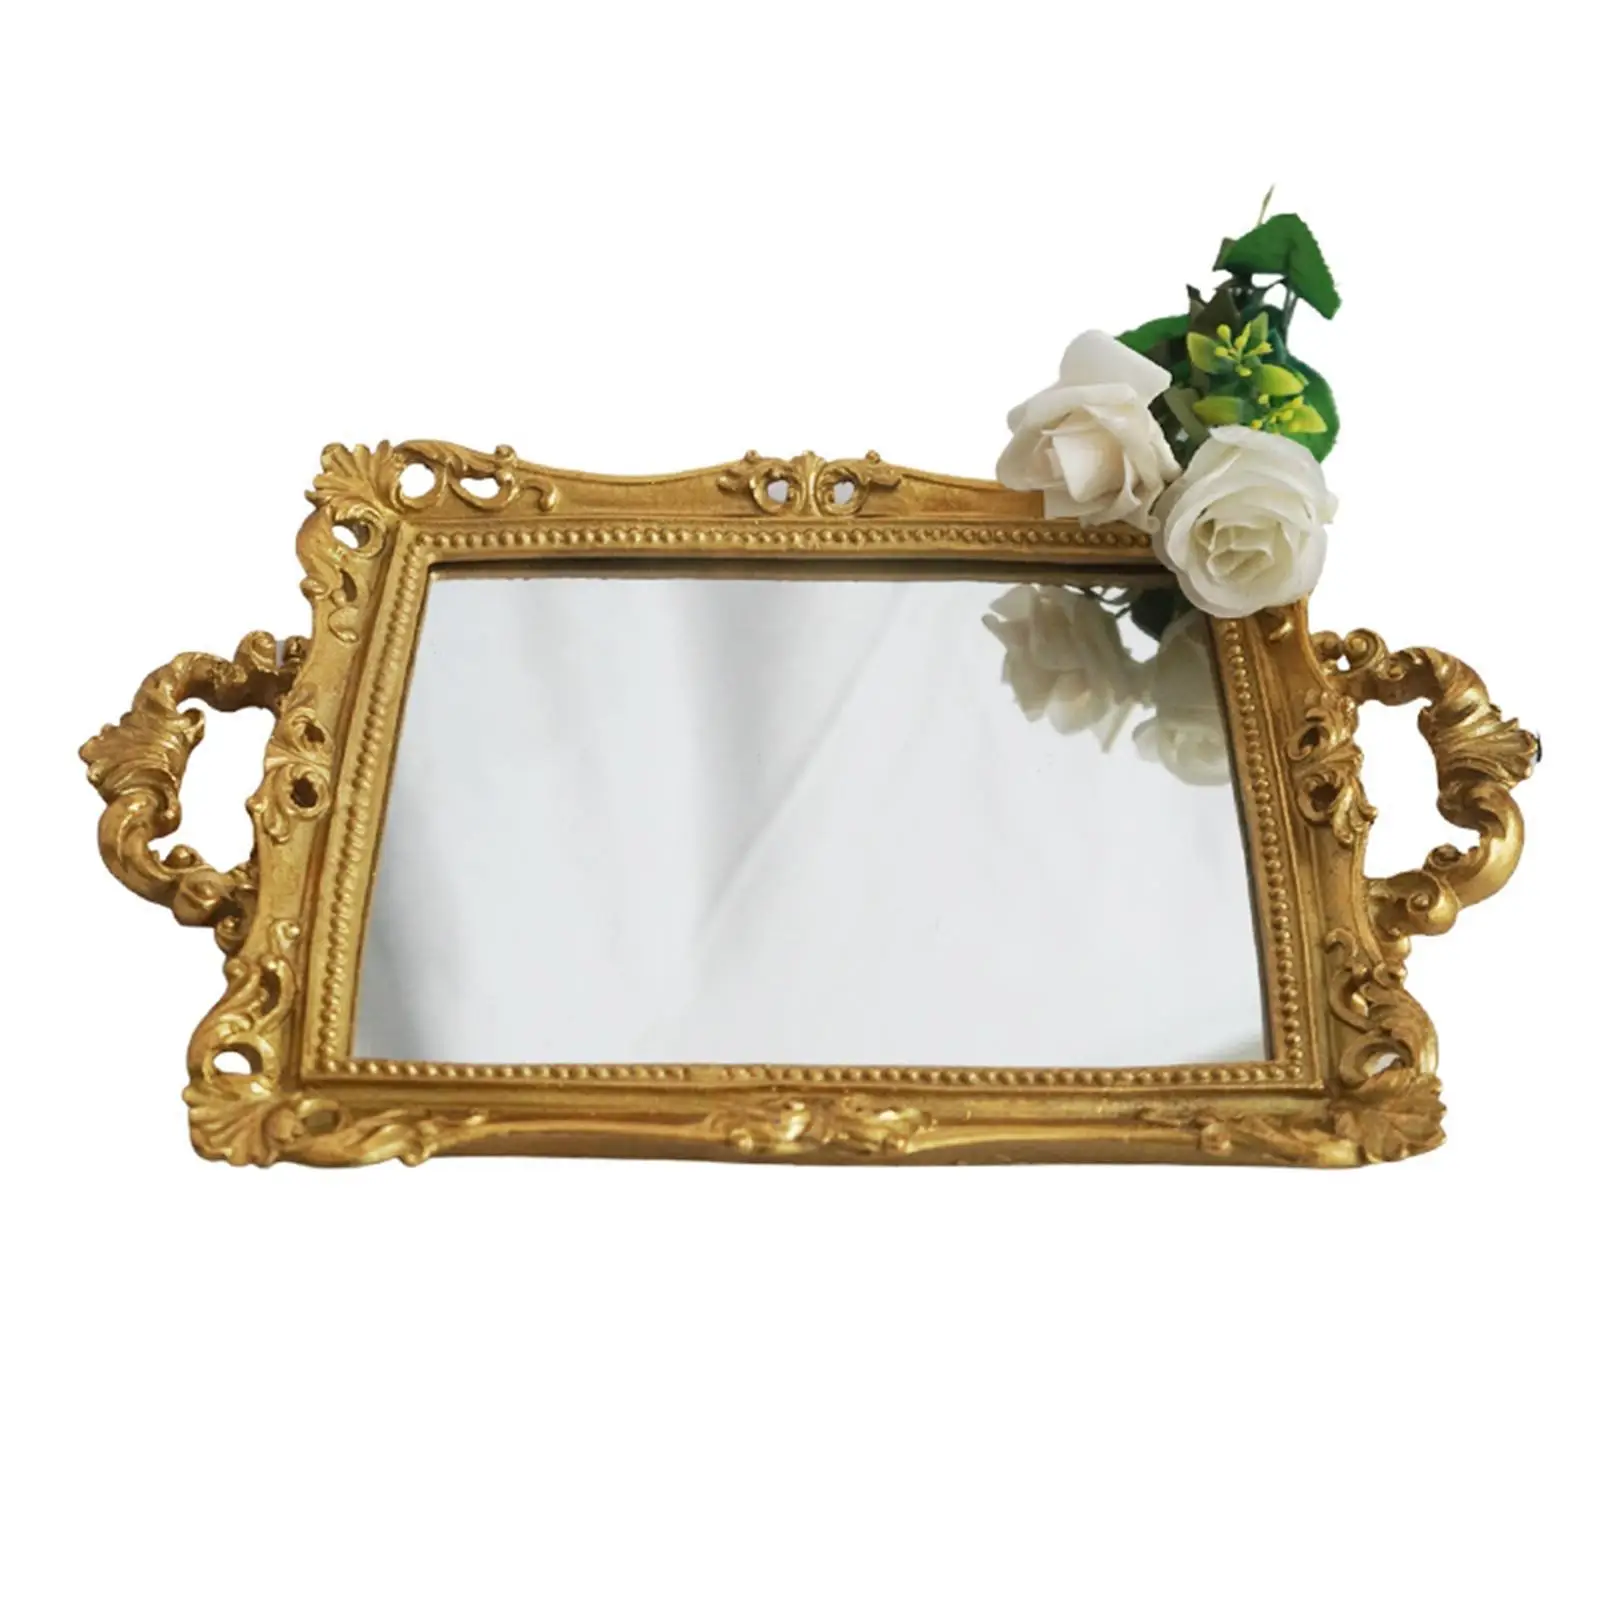 Mirror Tray Golden Serving Tray with Handle for Living Room Coffee Table Home Decor